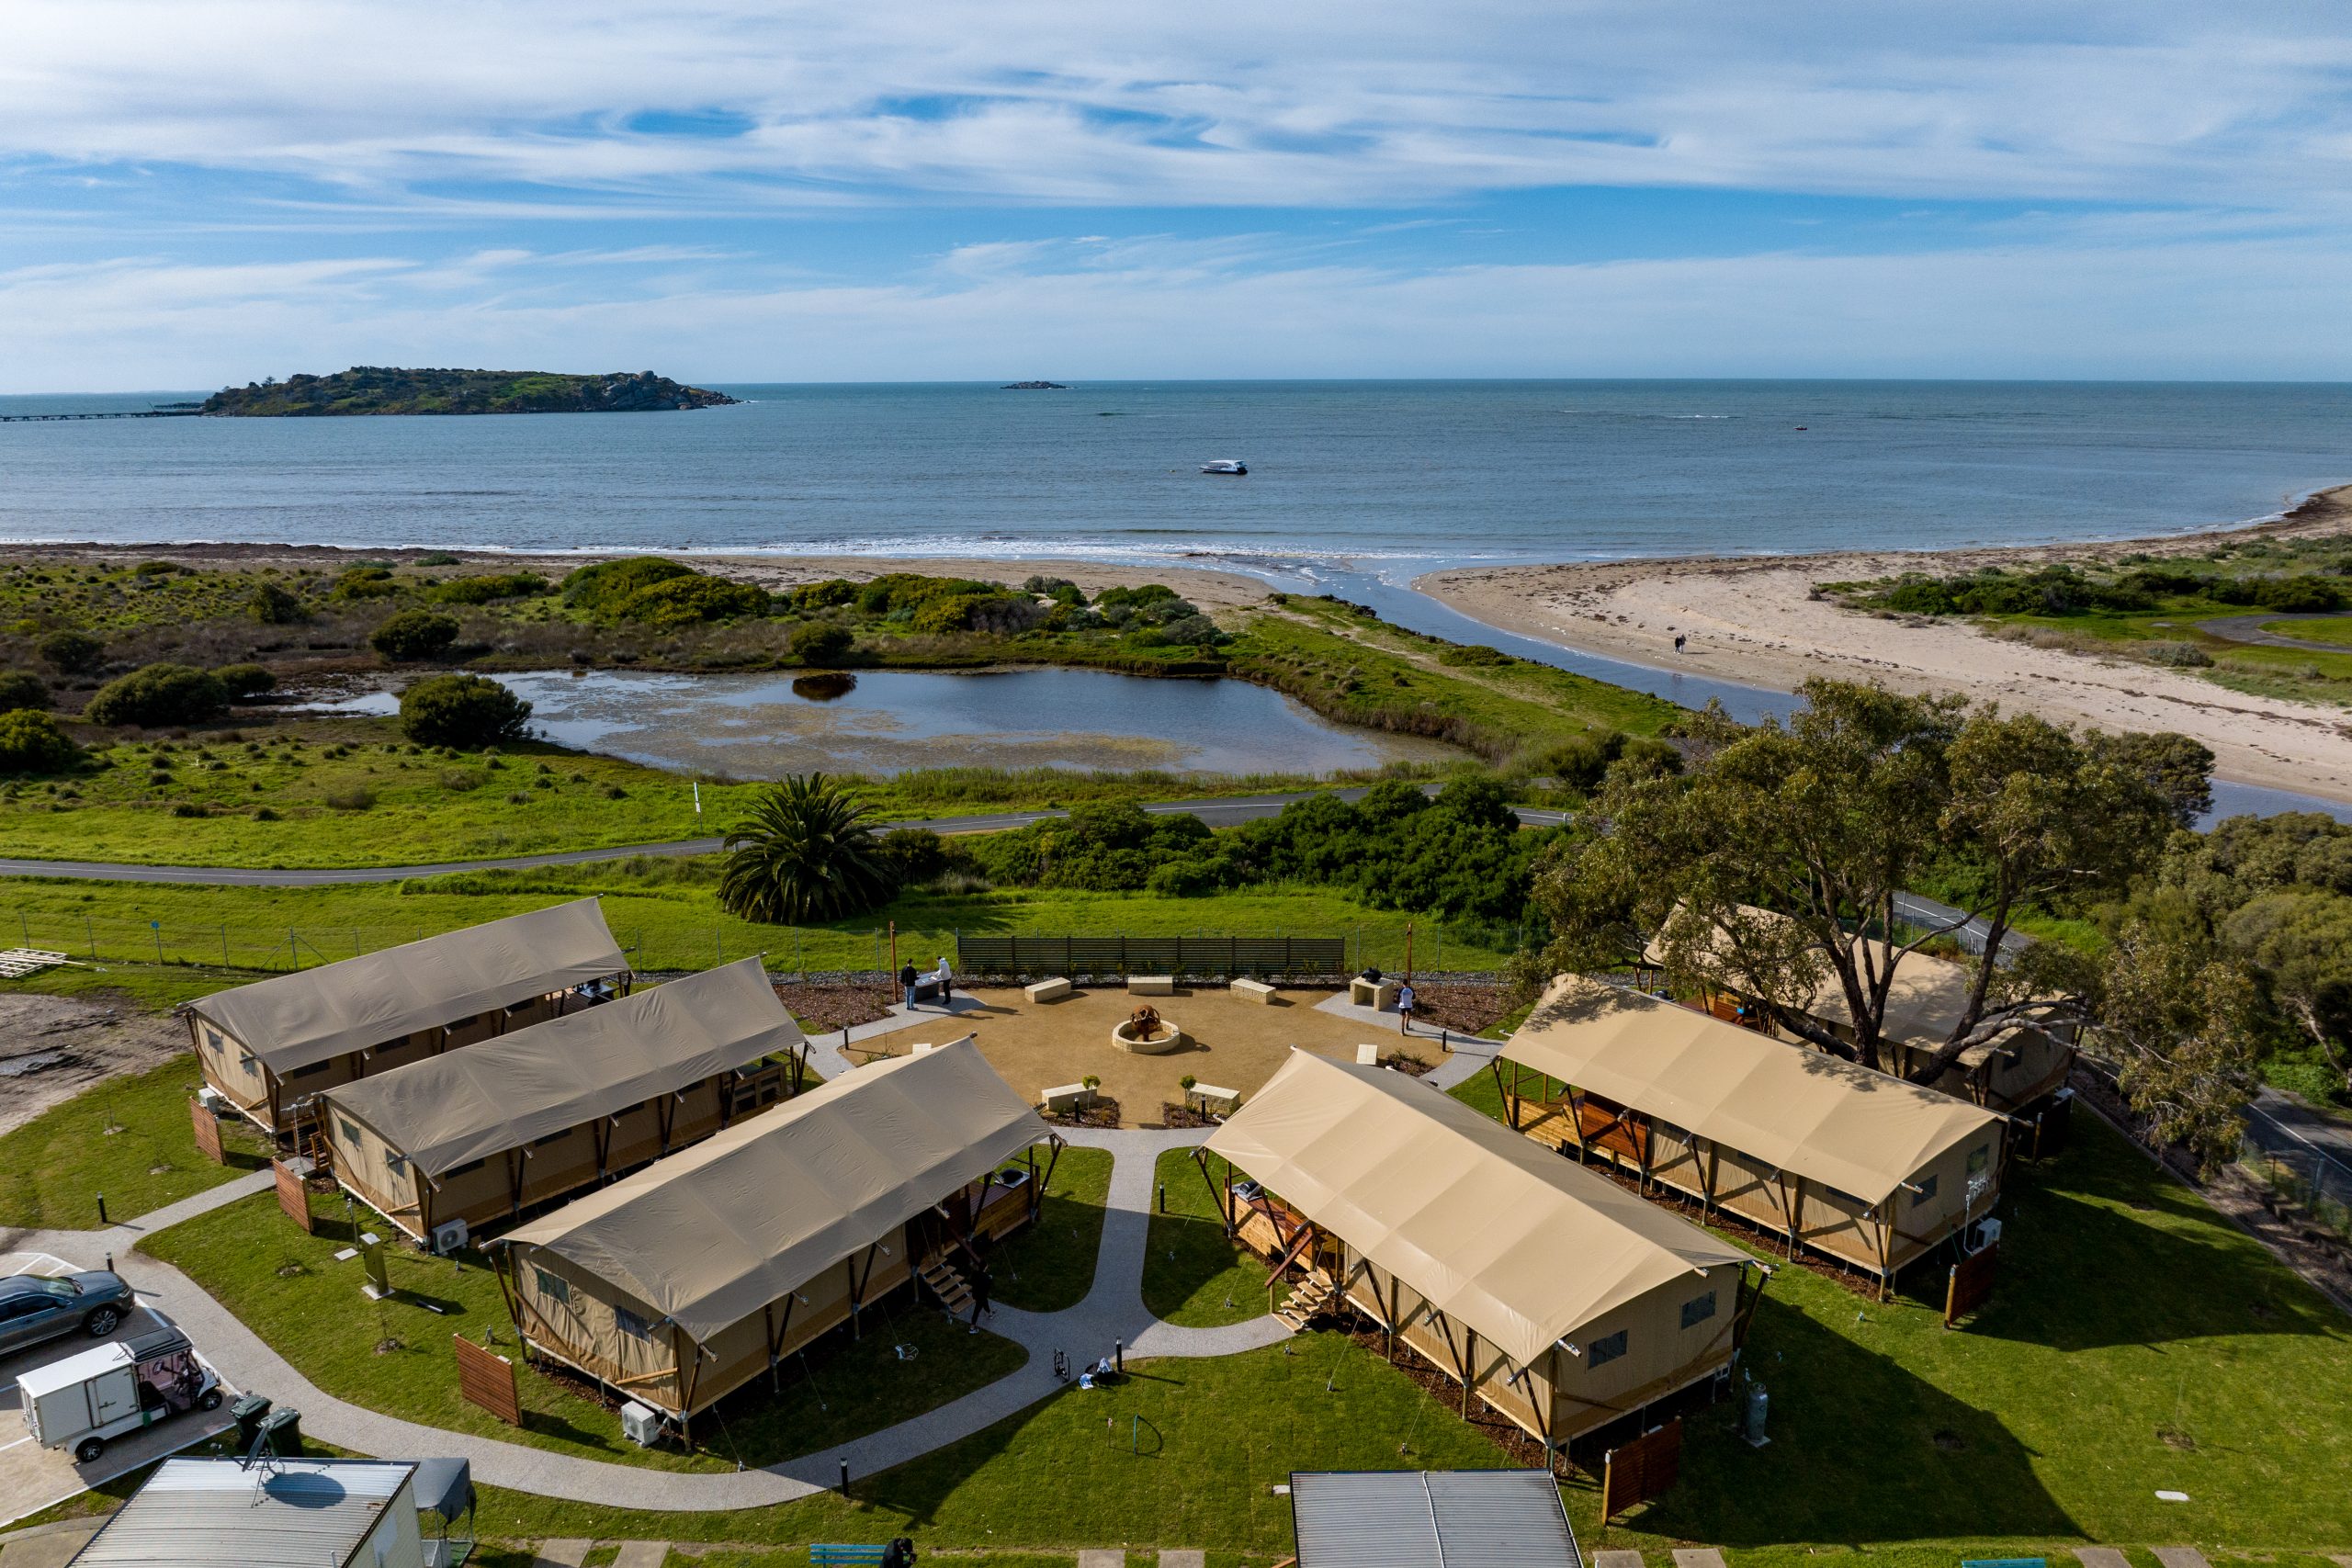 WIN a two night ‘safari tent’ stay at the NRMA Victor Harbor Beachfront Holiday Park!